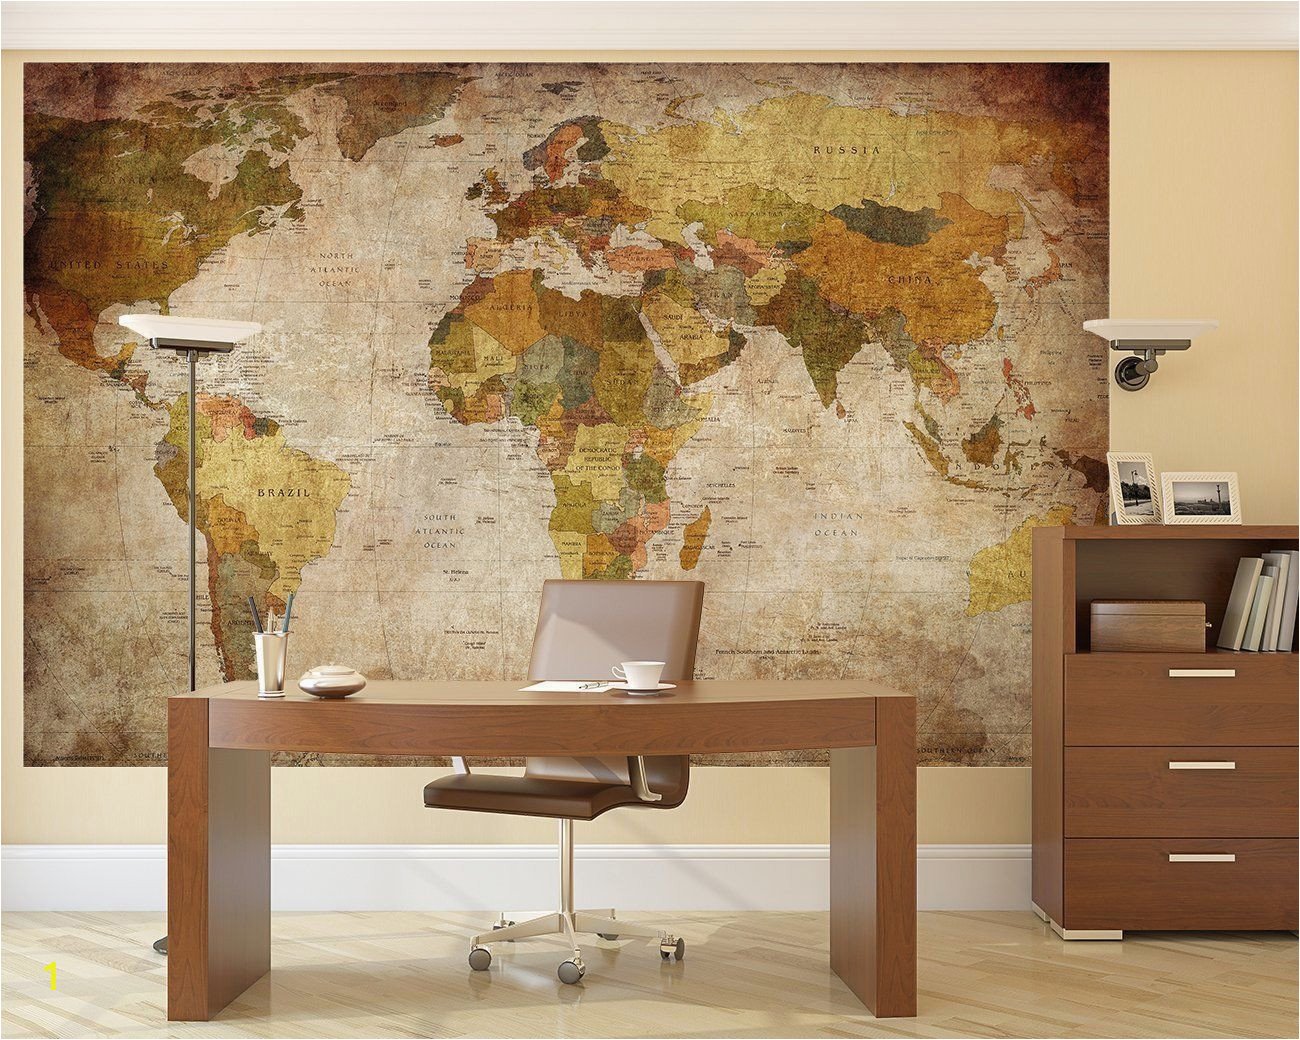 Pirate Map Wall Mural Details About Vintage World Map Wallpaper Mural Giant